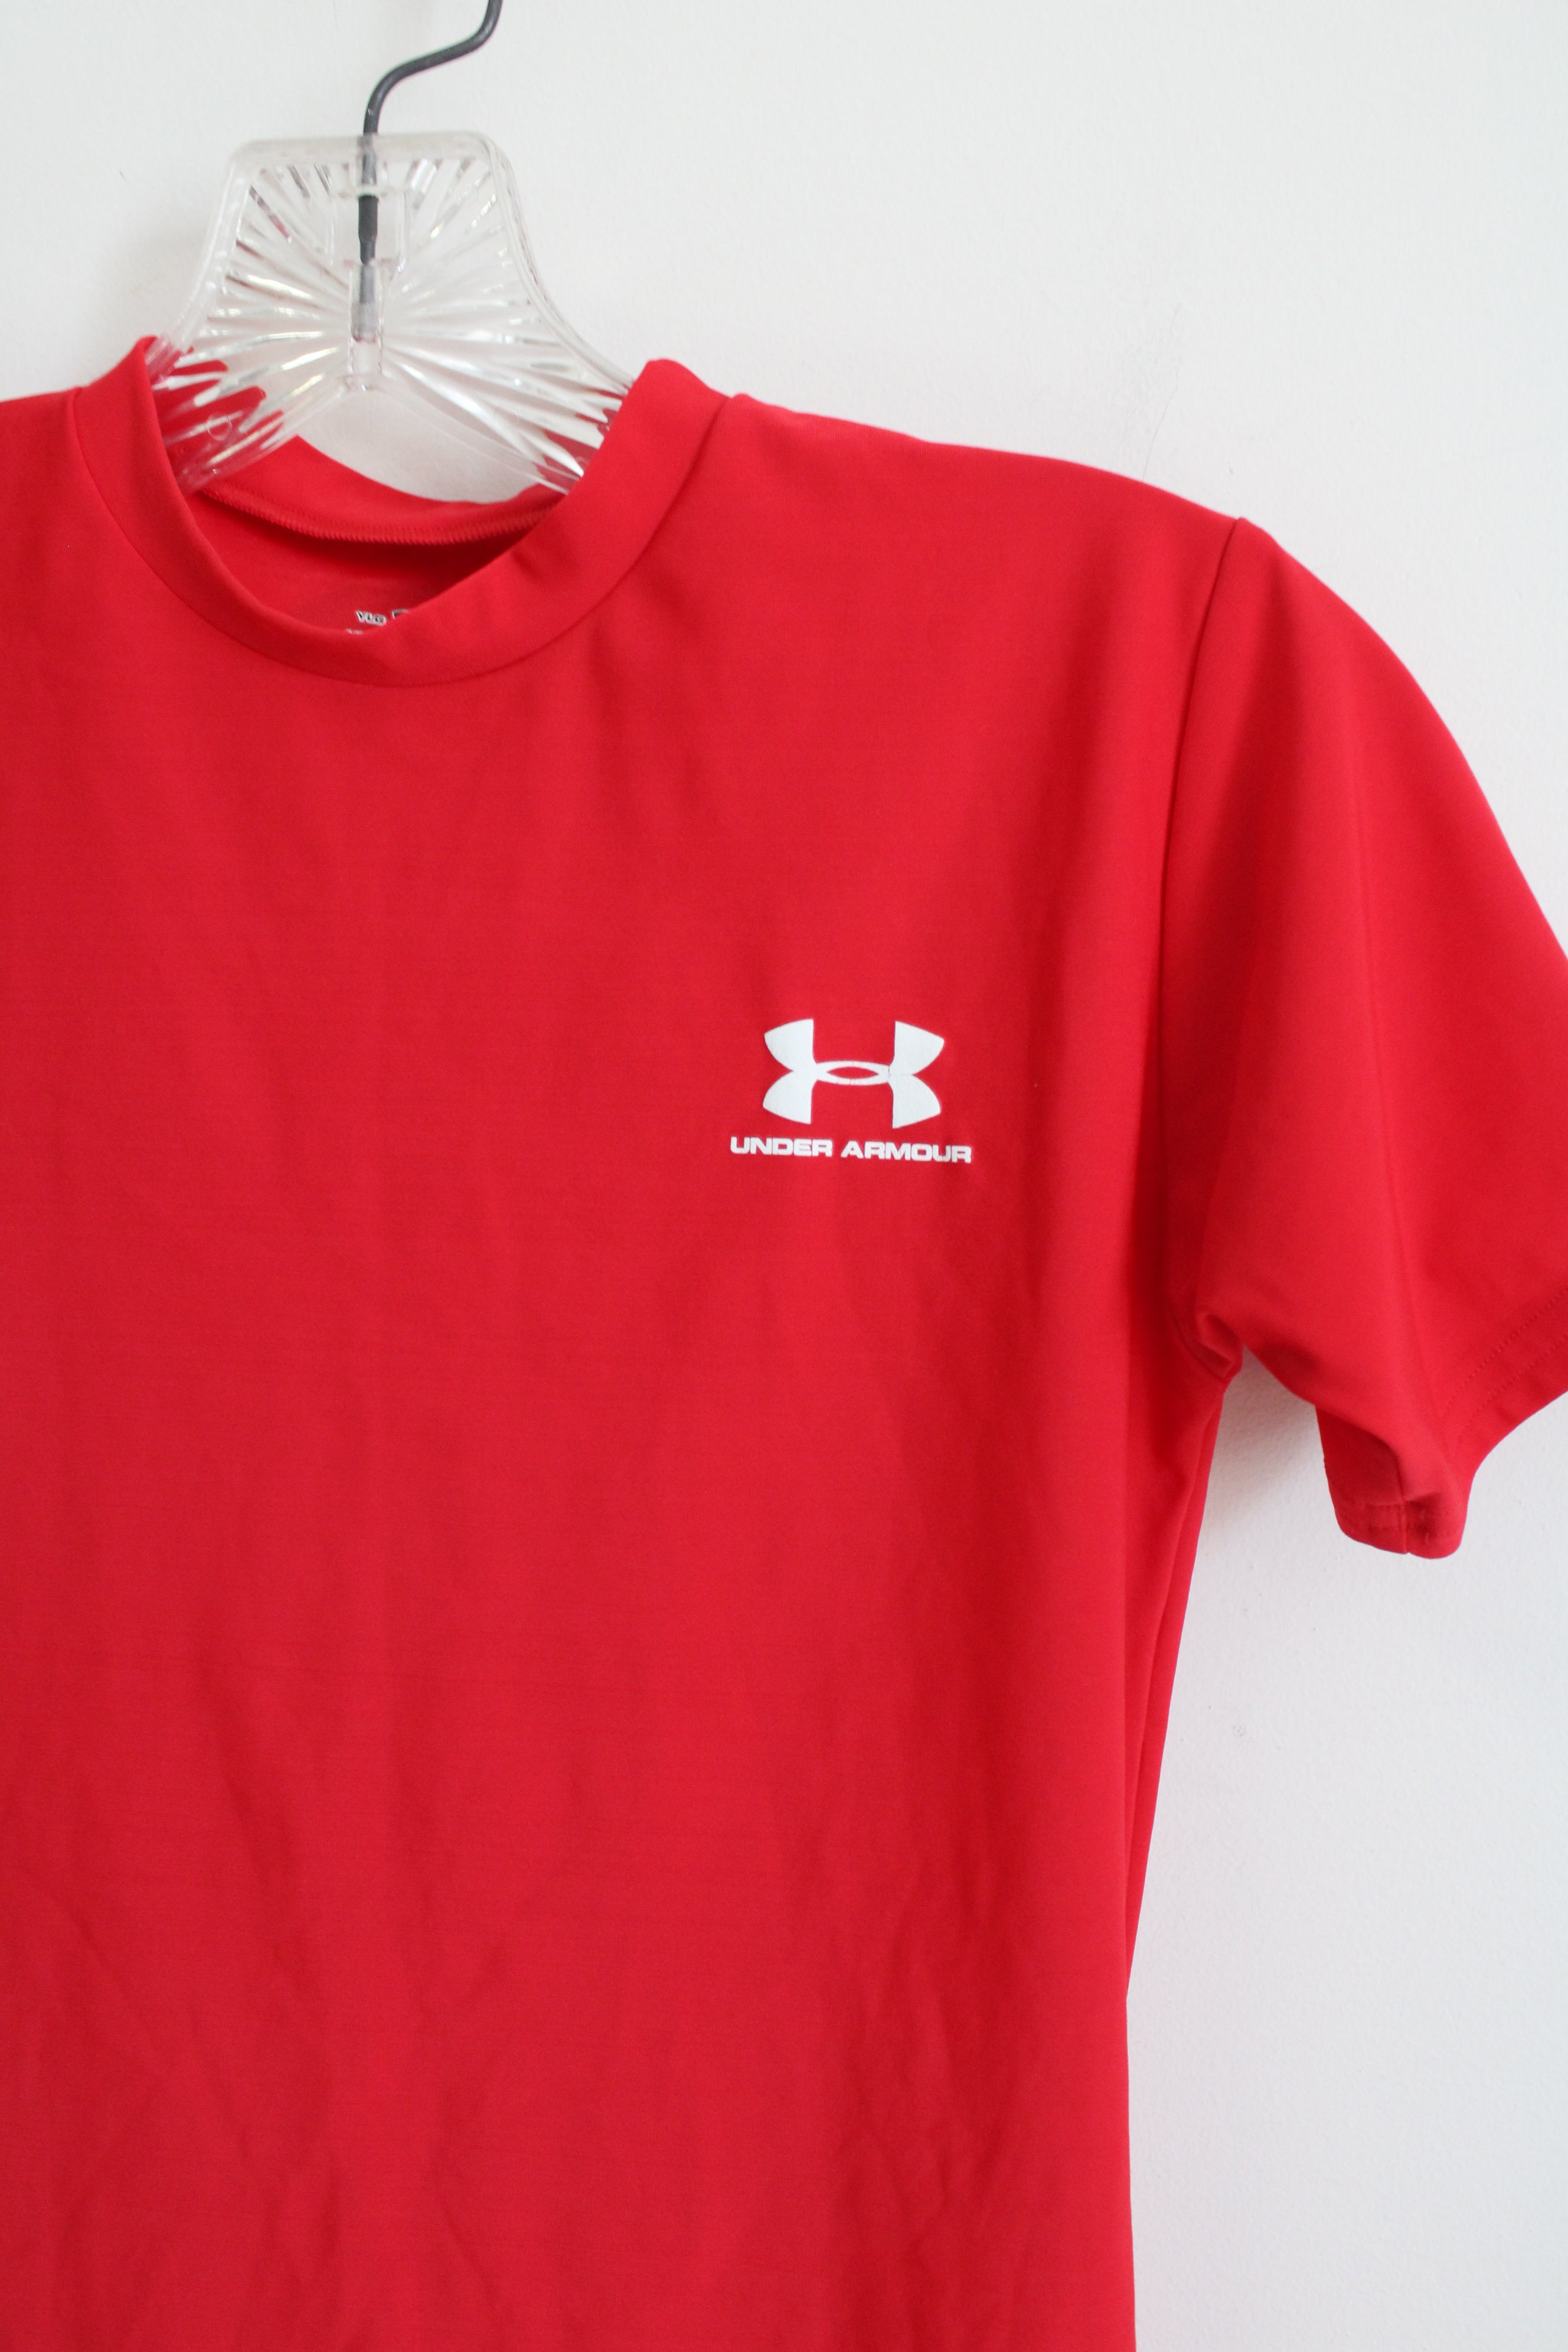 Under Armour Red Top | L